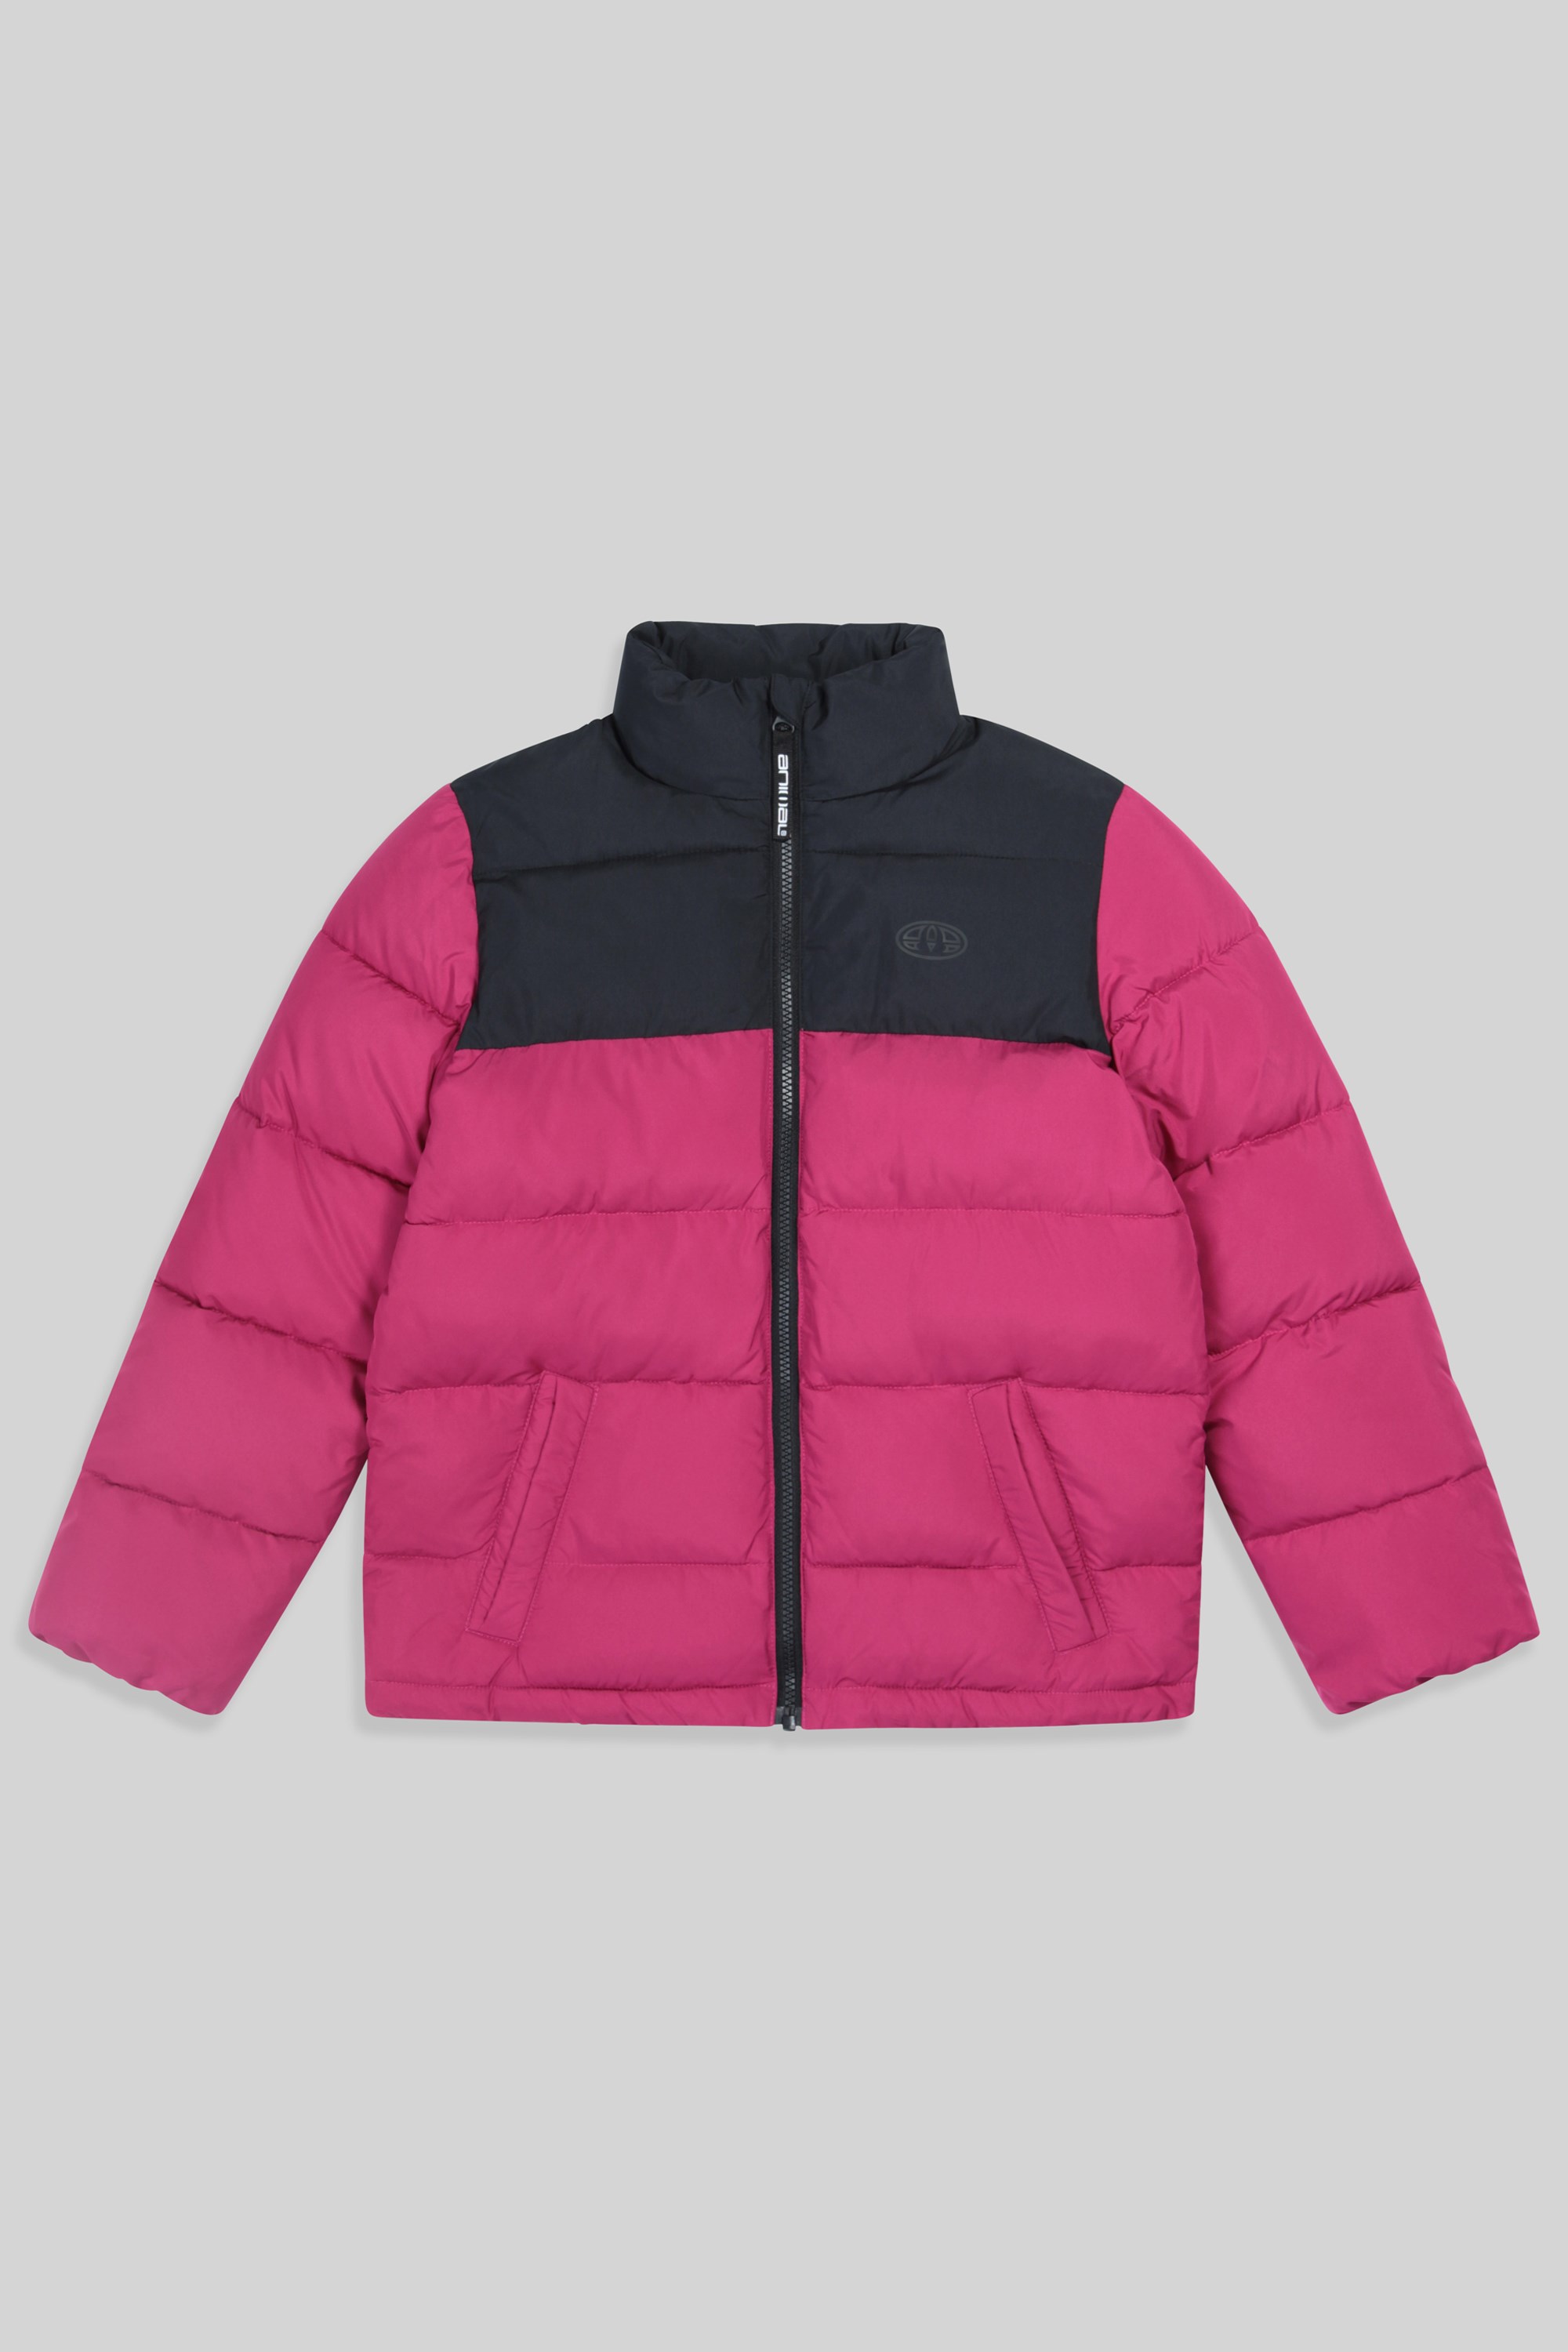 Explore Kids Recycled Jacket - Pink